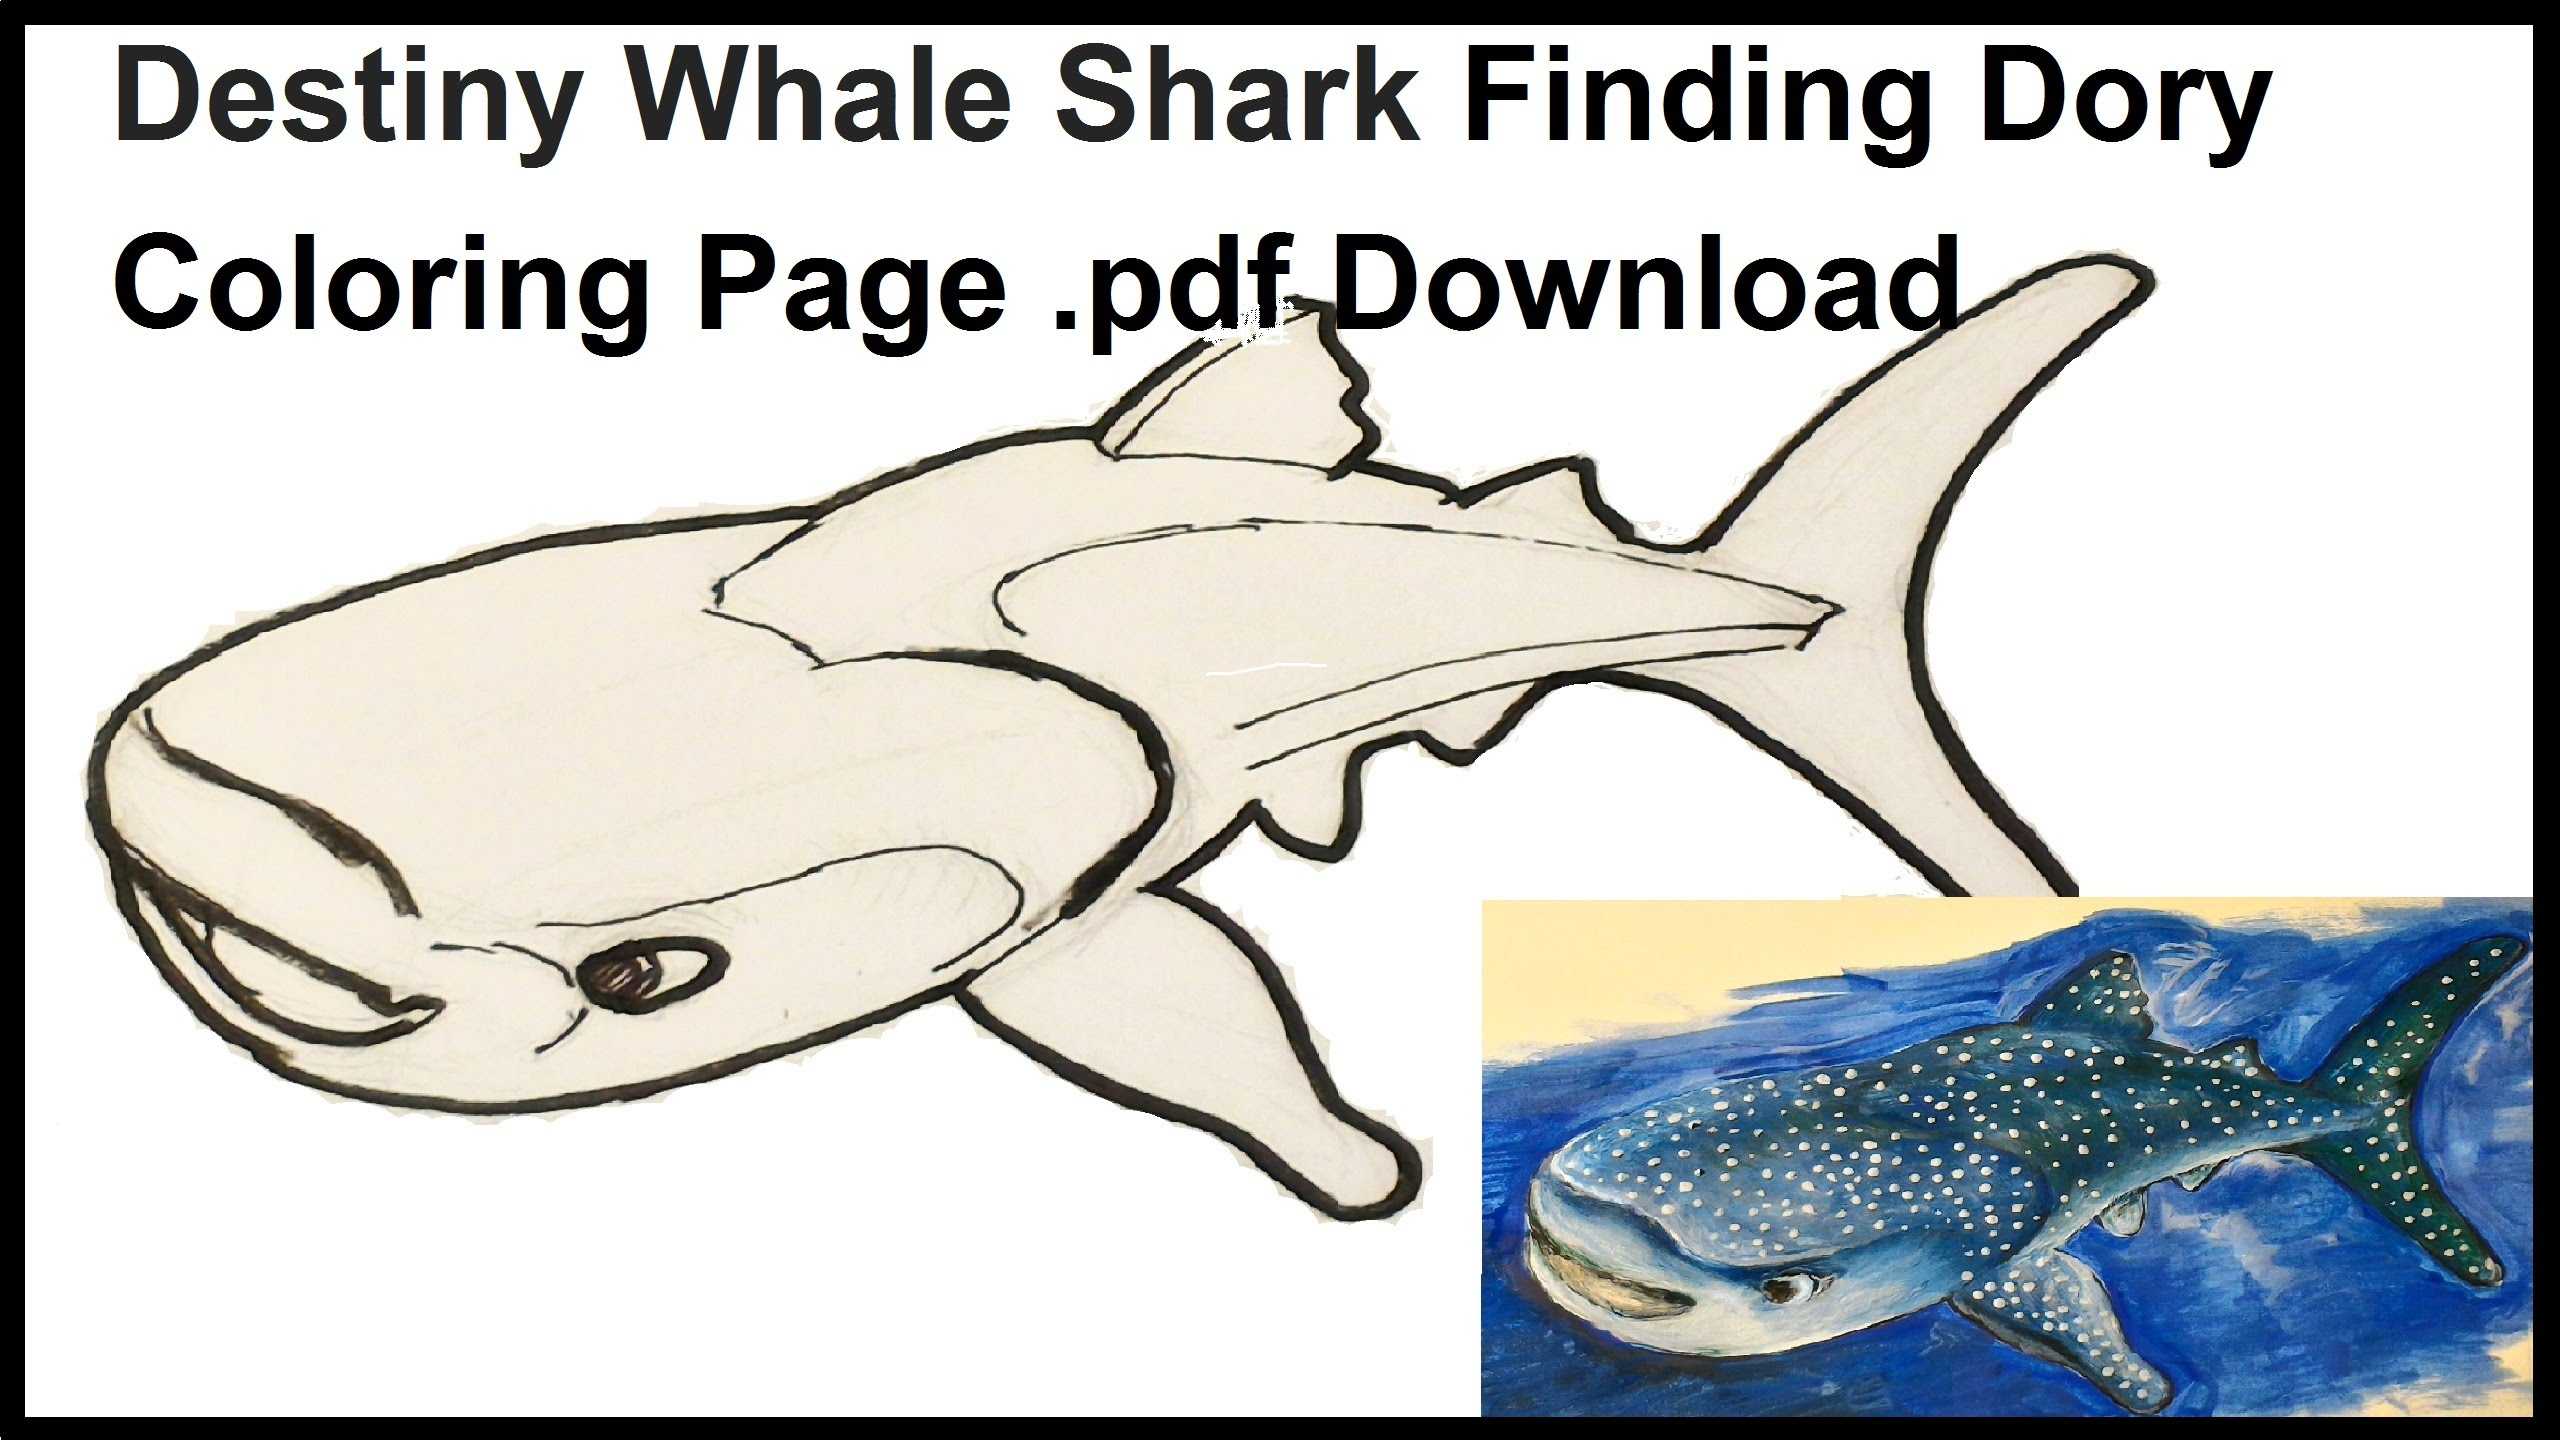 Finding Nemo Worksheet as Well as Whale Shark Coloring Pages